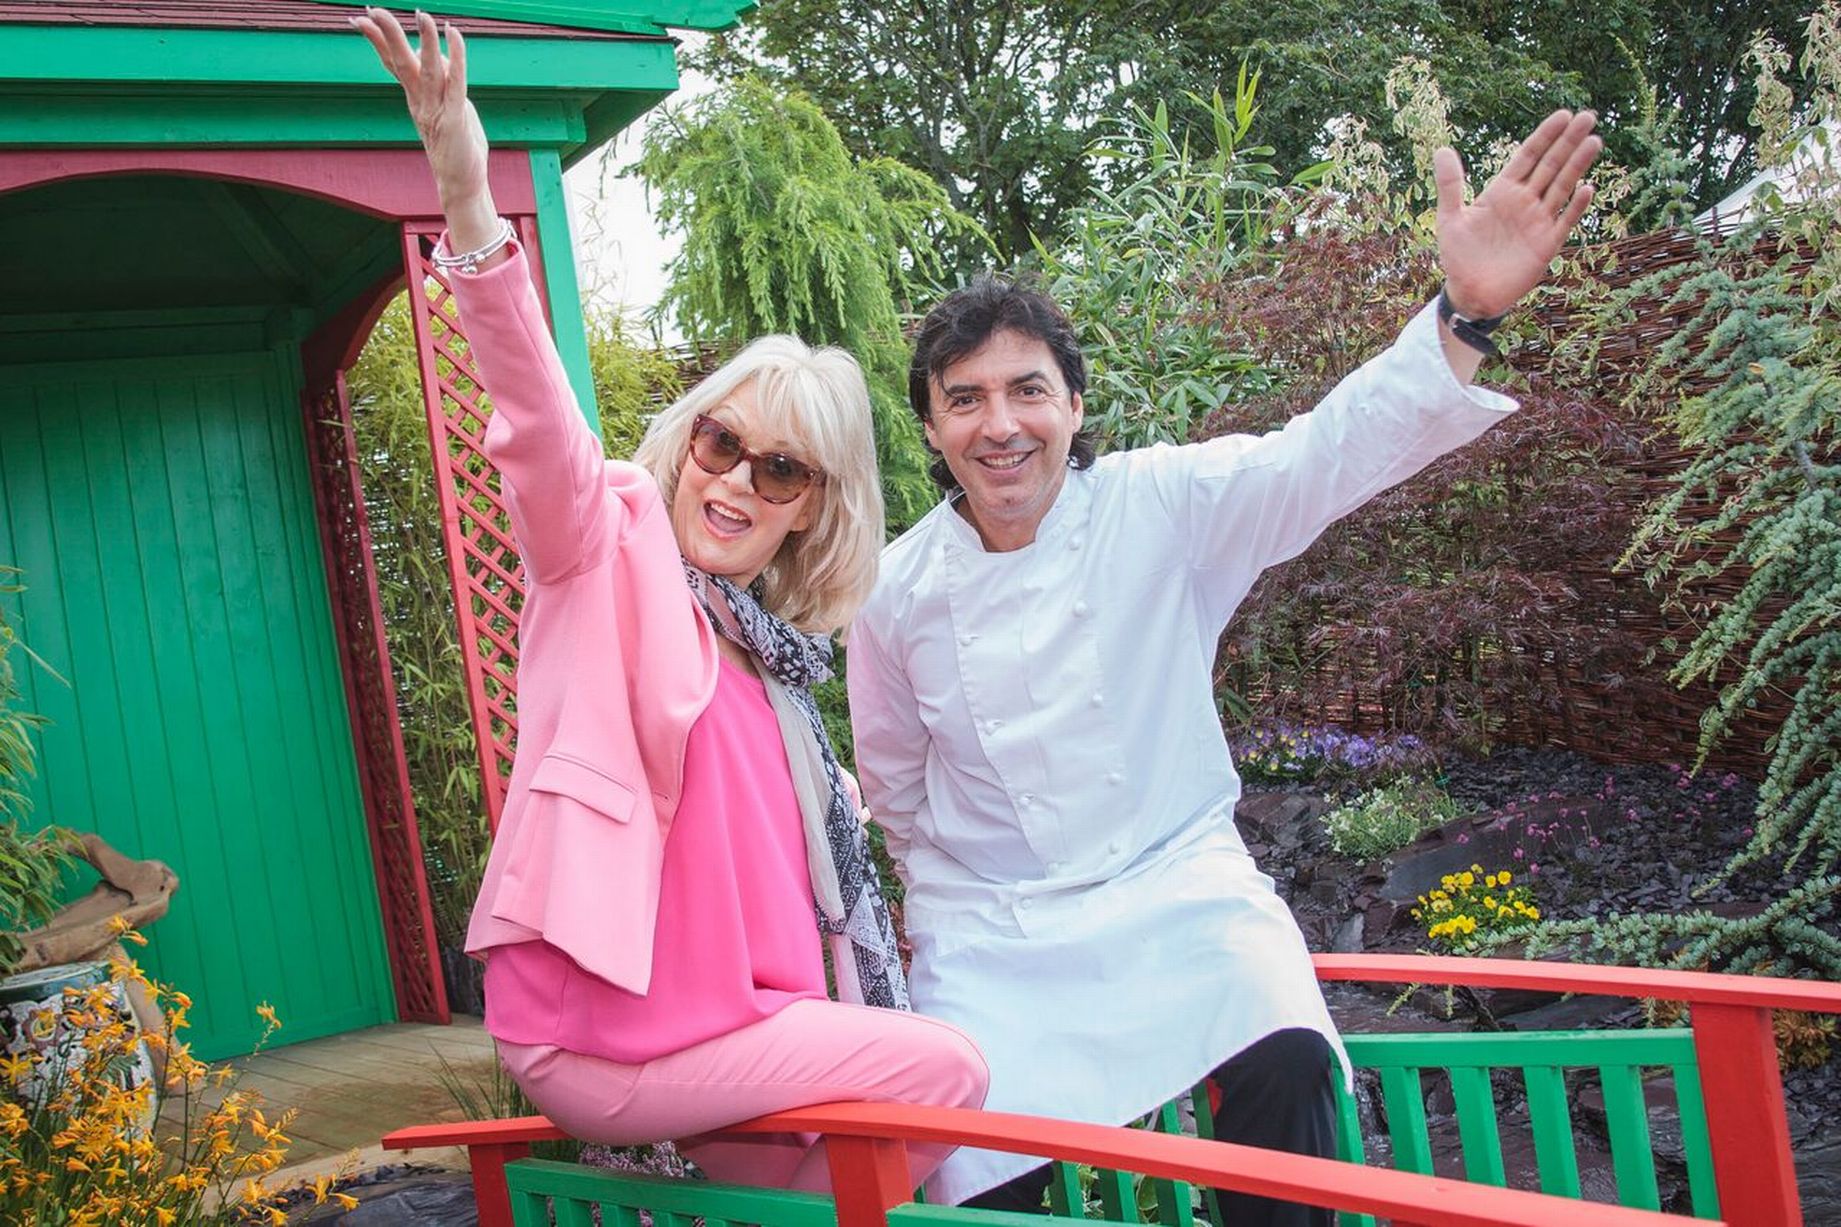 Sherrie Hewson and Jean-Christophe Novelli at Southport Flower Show 2015 Photo by Graham Moreton of Tarleton Photography